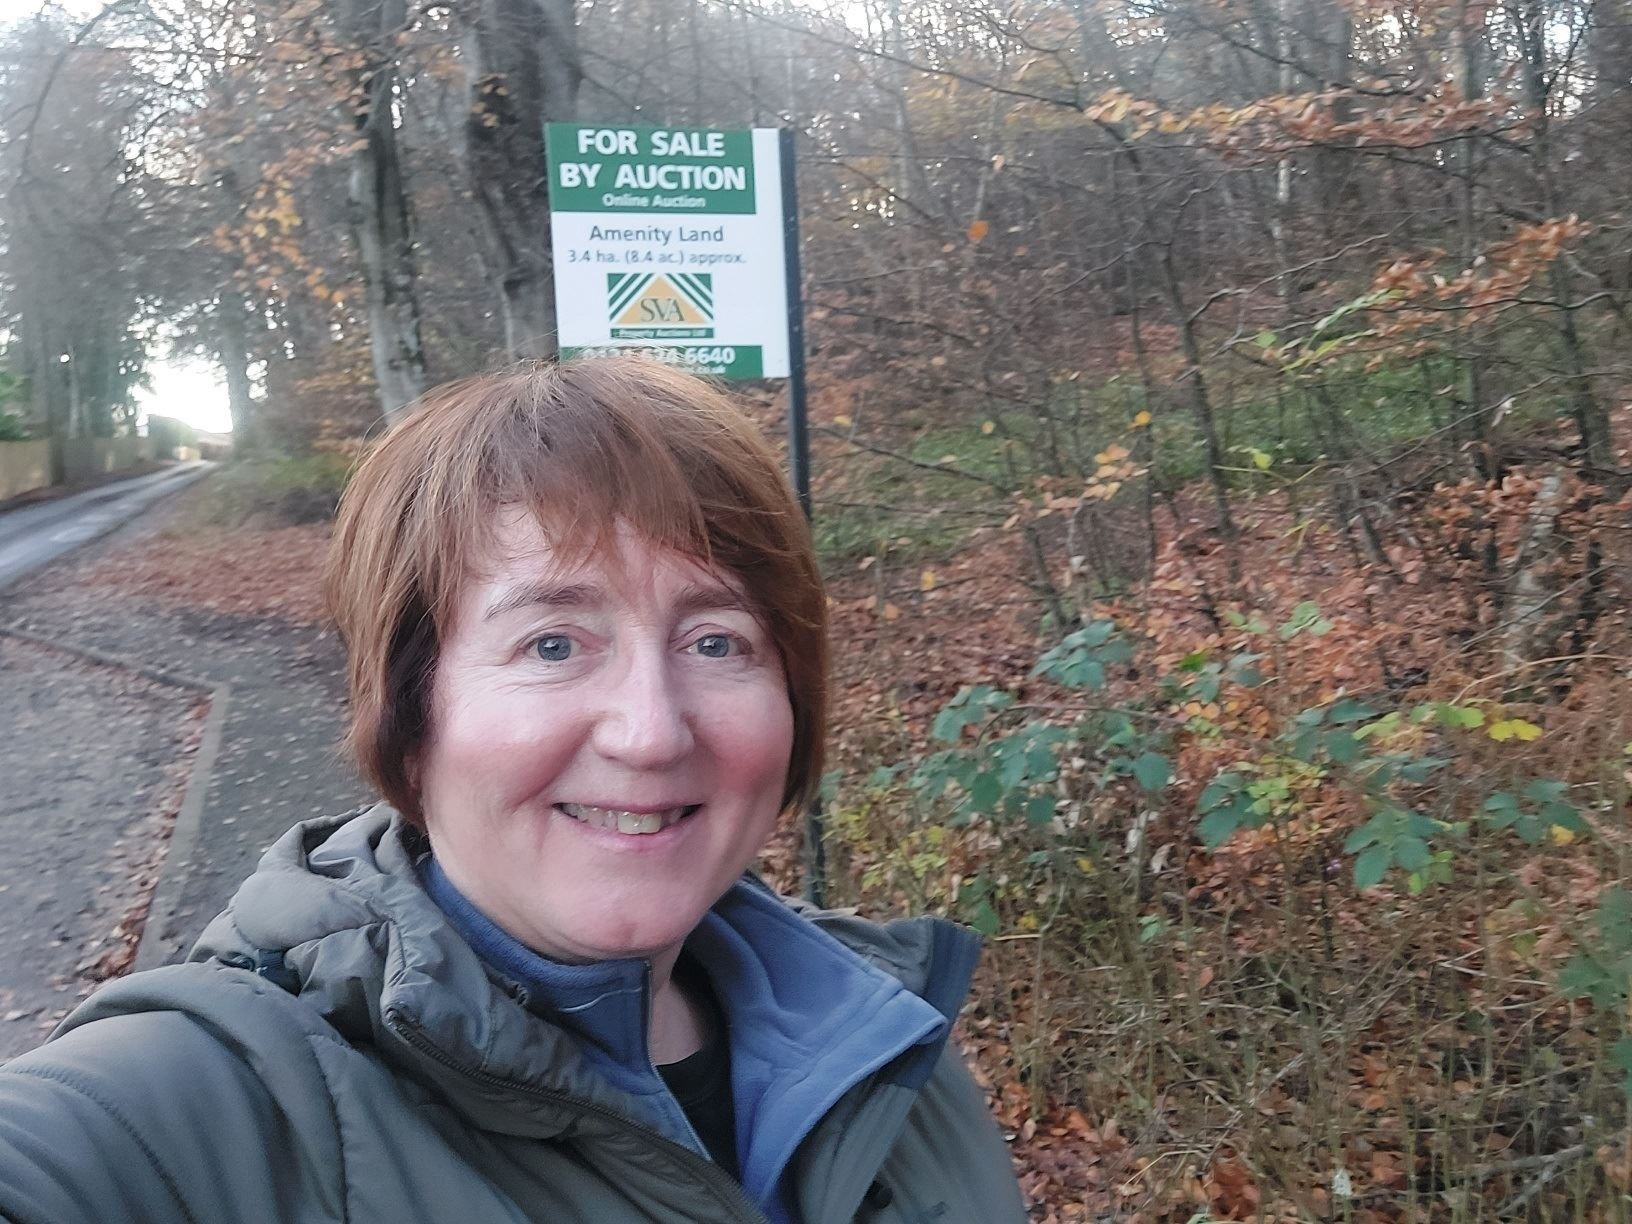 Councillor Angela MacLean was delighted with the coordinator effort to secure the woodland and said the real work starts now.